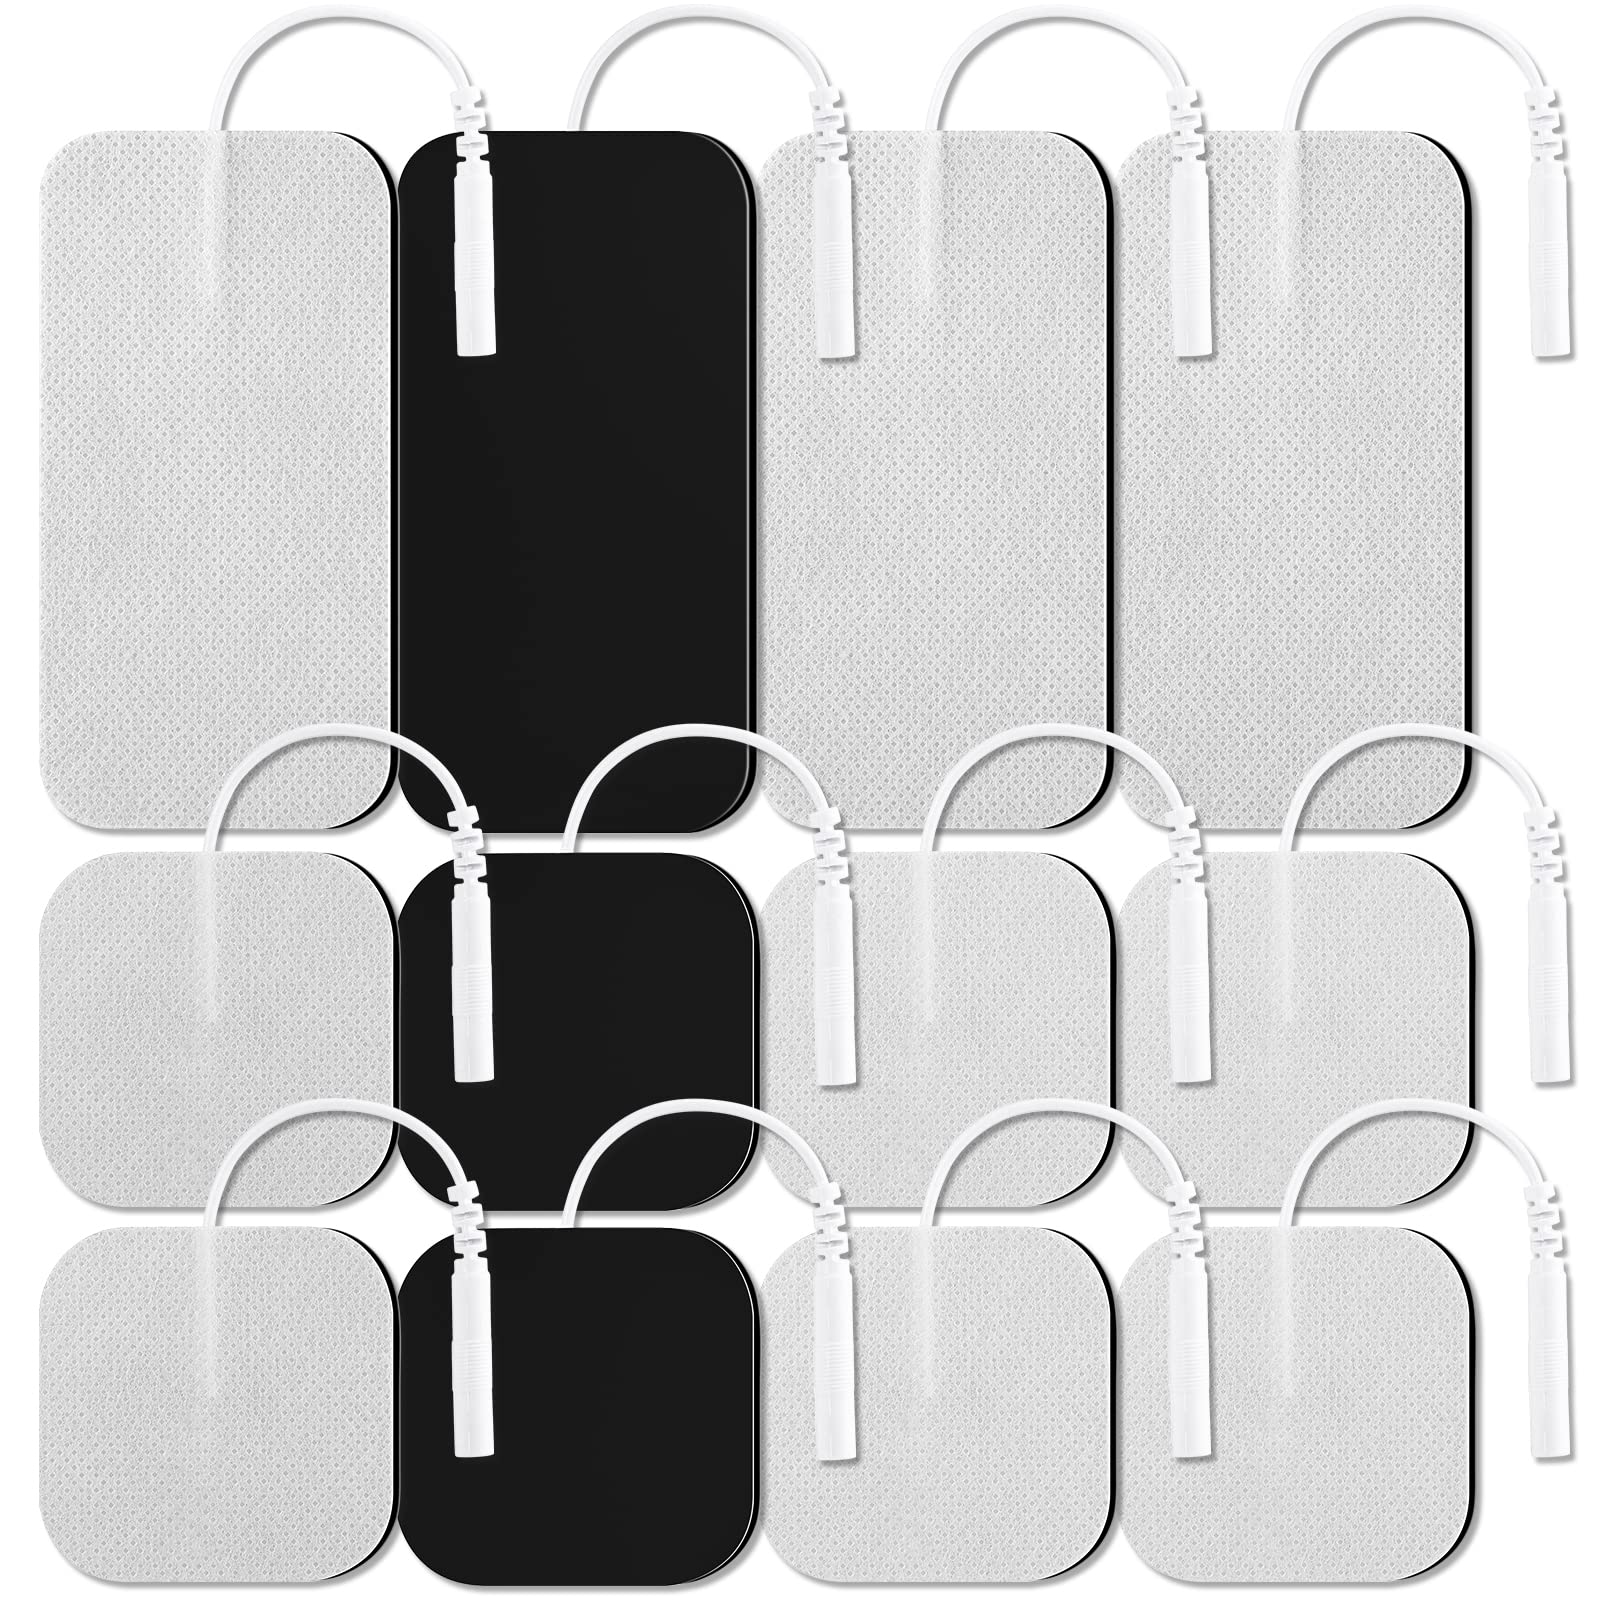 12 TENS Unit Electrode Pads 2 x 2 Replacement TENS EMS Massage 2 Inch  Square White Cloth with Premium Adhesive Gel